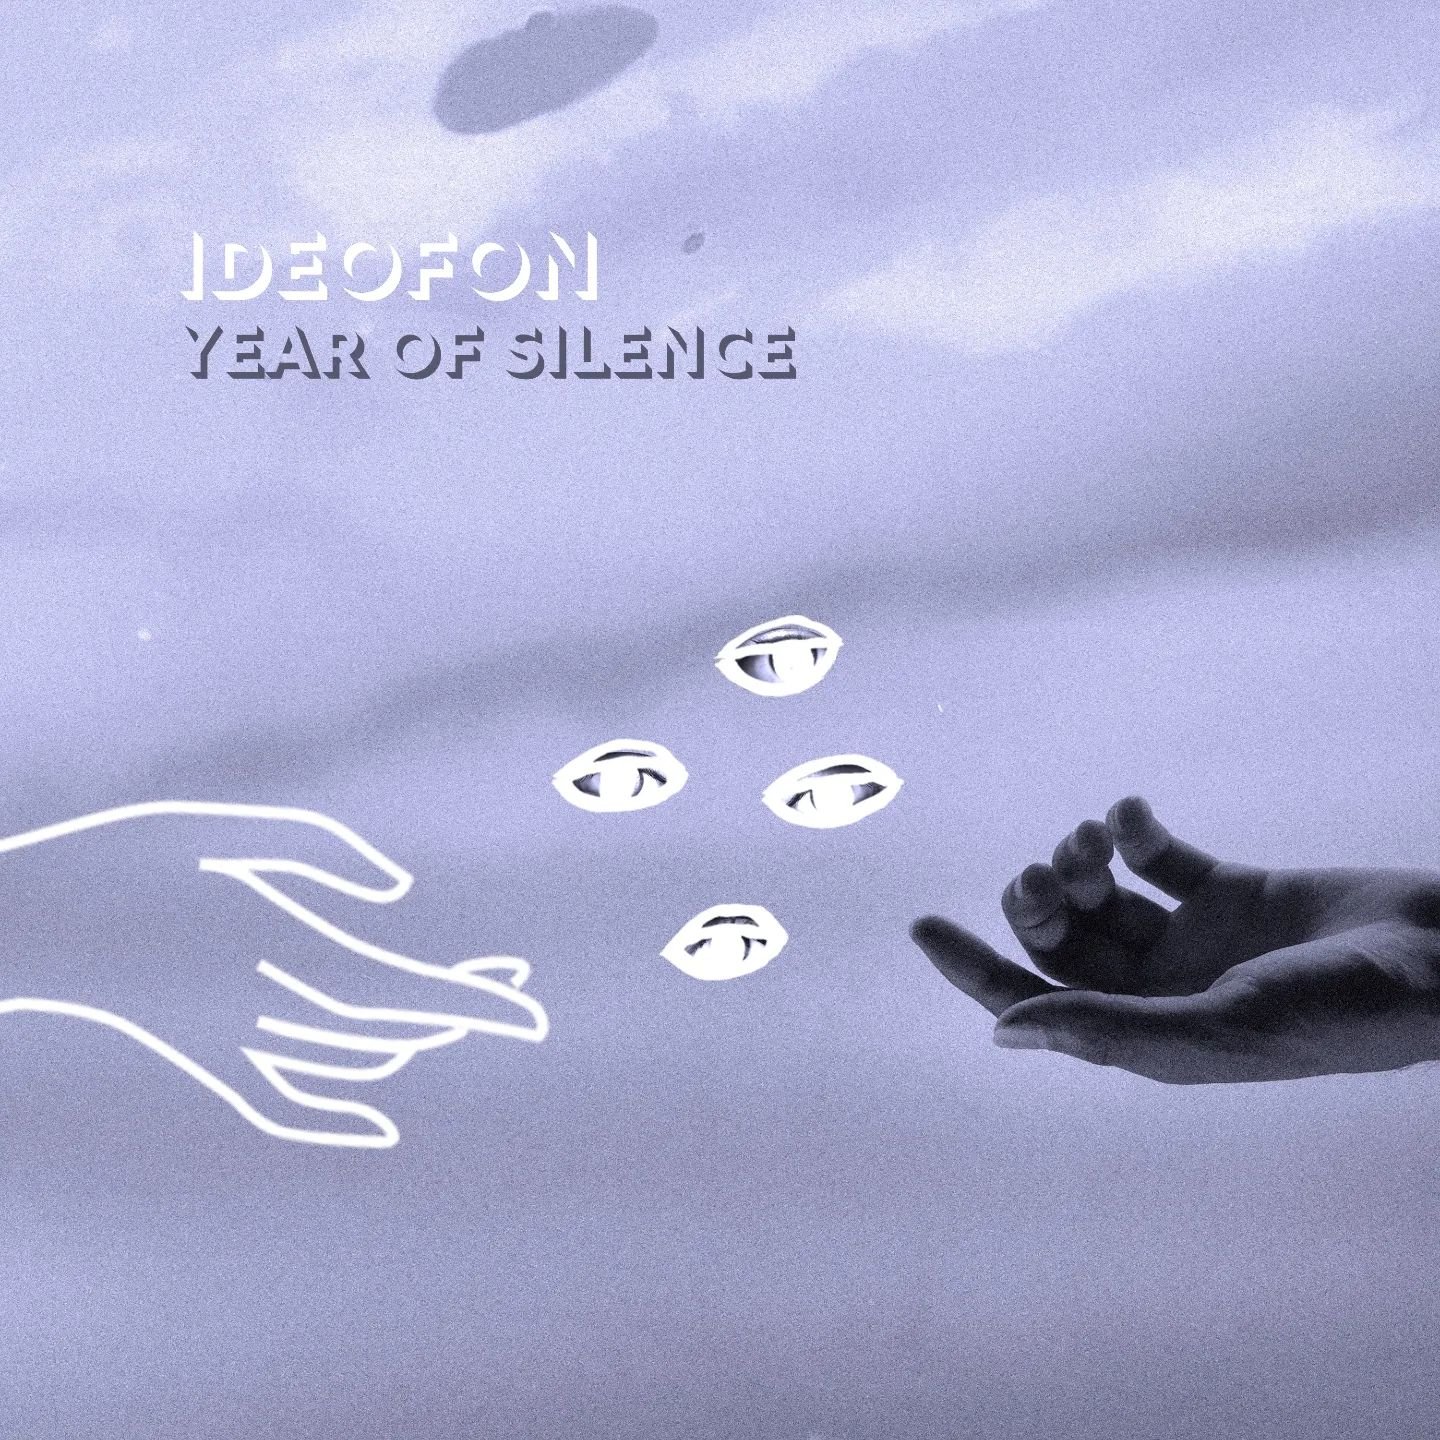 Our new single Year of Silence is out!
You can find it being sung by ghostly children's choirs in abandoned buildings, or wherever else you listen to music. We really hope you like it ❤️

Production/mix: Kevin Skaggs @_sounddiscovery_
Master: Dale Be